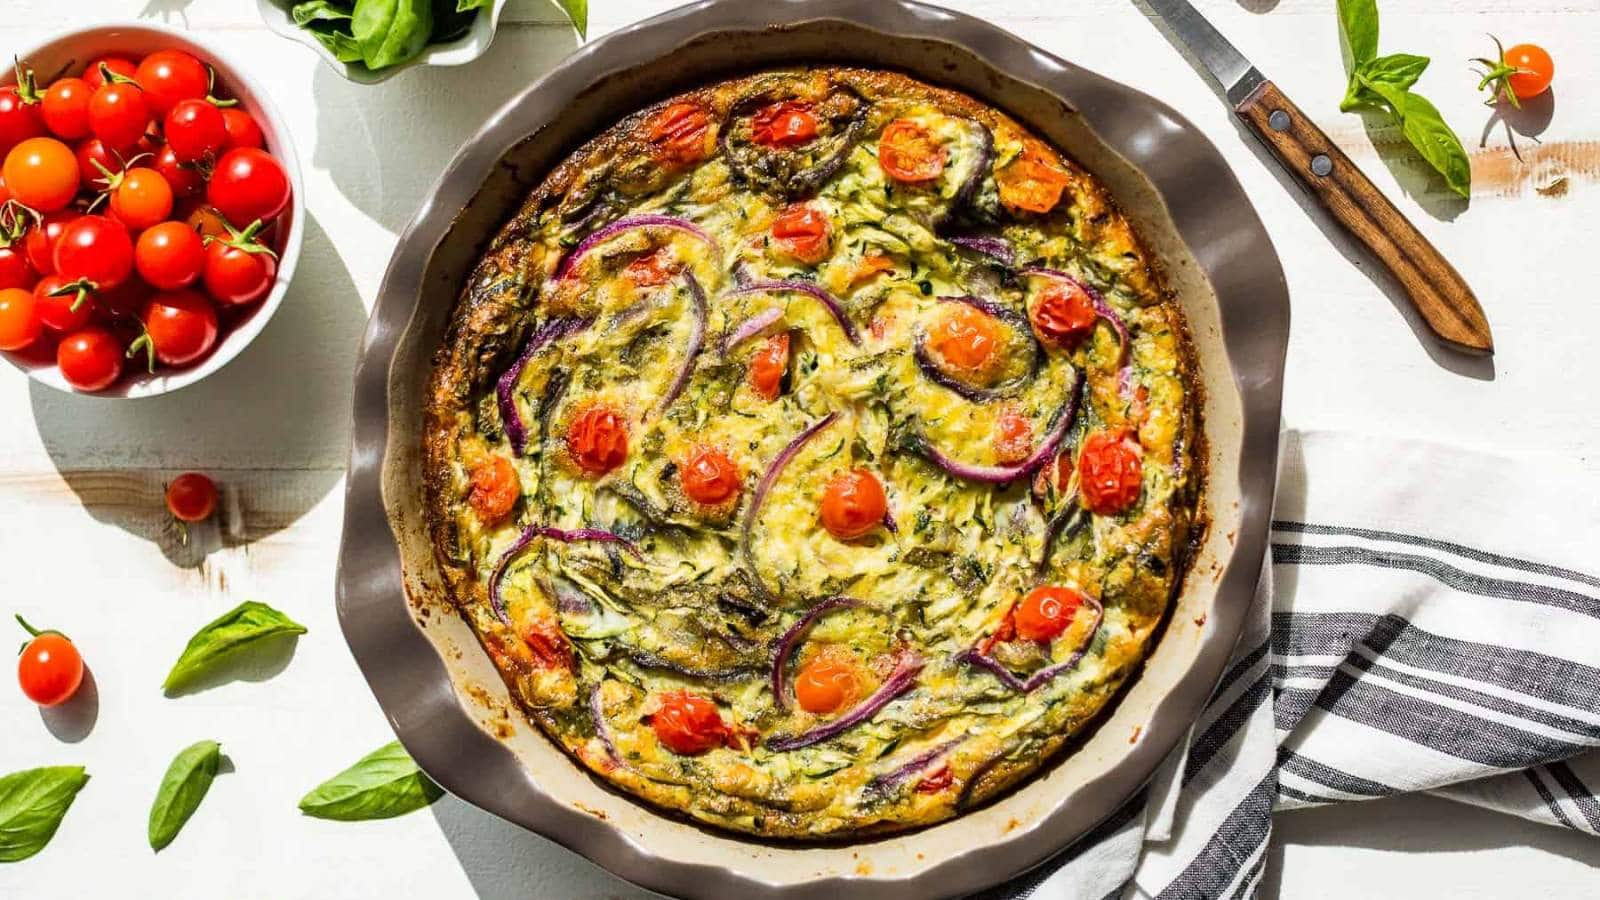 <p>Bursting with flavor, this Vegetarian Breakfast Casserole is easy to make for breakfast that’s also great for meal prepping. Packed with veggies and protein, this casserole is like a crustless quiche. Enjoy the combination of zucchini, onion, tomatoes, and basil with 2 kinds of optional cheeses to add in as well.</p><p><strong>Get the Recipe: <a href="https://getinspiredeveryday.com/food/easy-veggie-breakfast-bake/" rel="noreferrer noopener">Vegetarian Breakfast Casserole</a></strong></p>